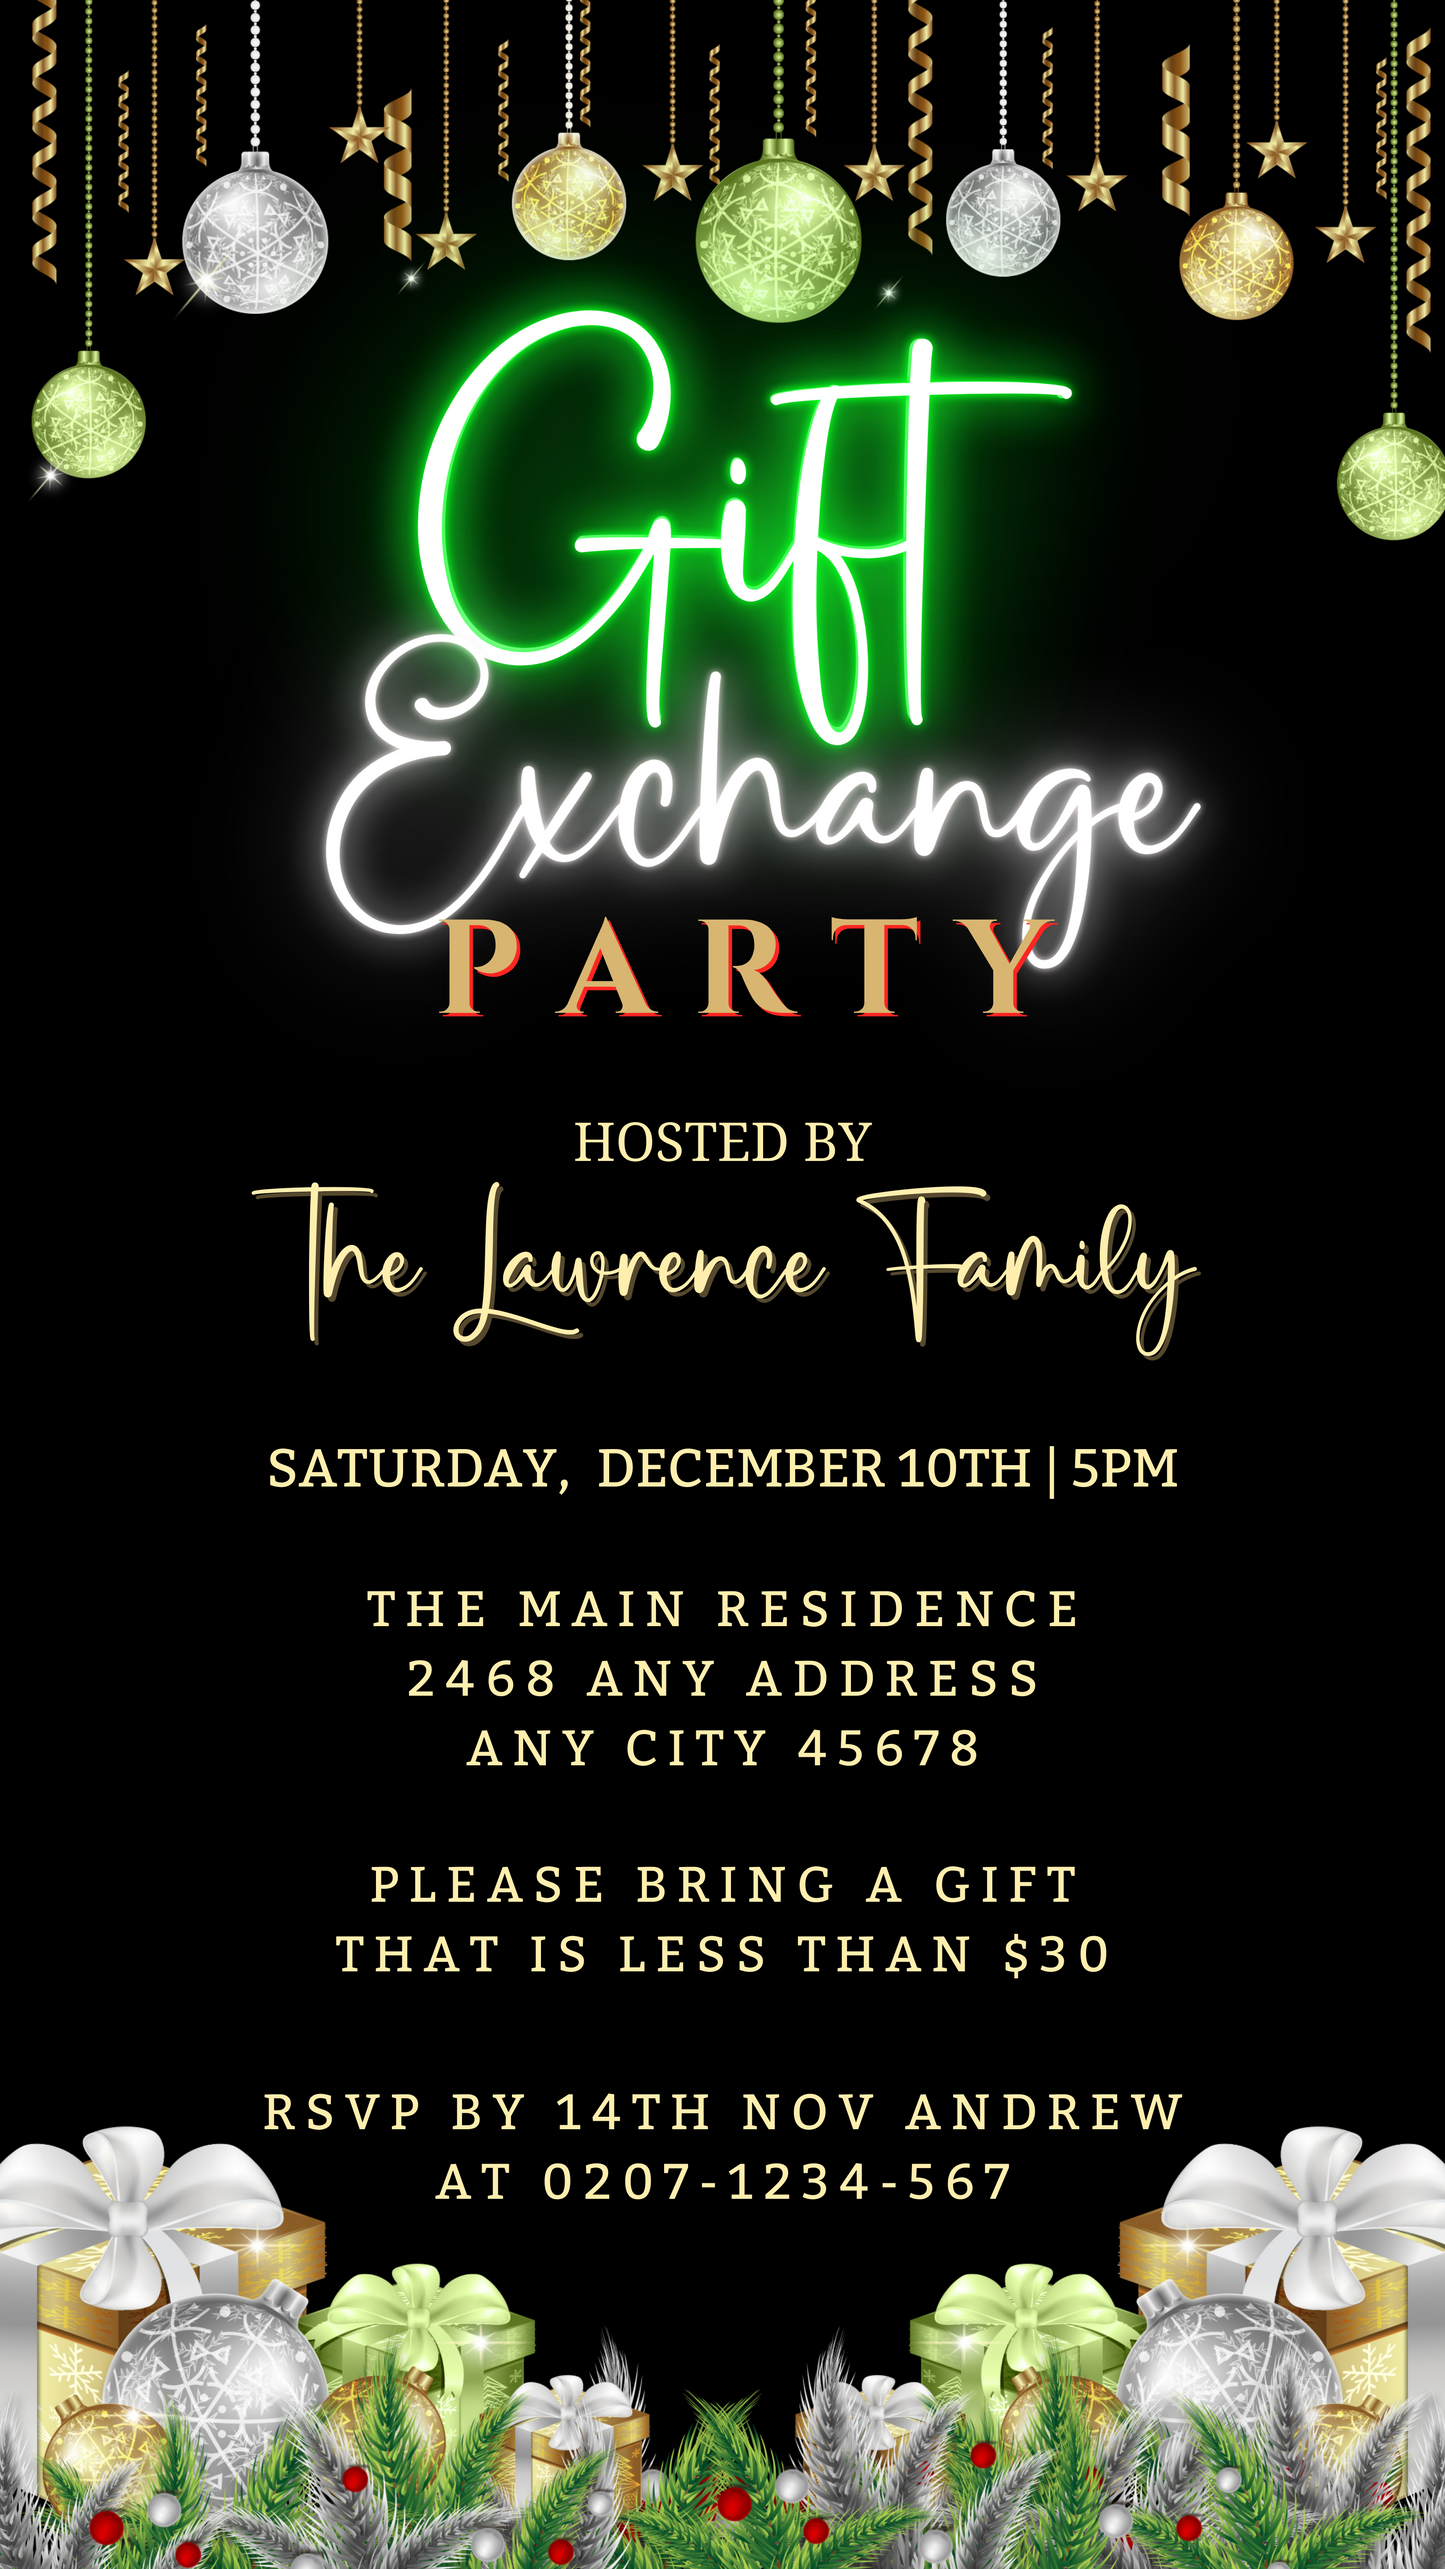 Green Neon Ornaments Gift Exchange | Christmas Party Evite featuring editable digital invitation with green and black design, gift boxes, and ornaments for customisation via Canva.